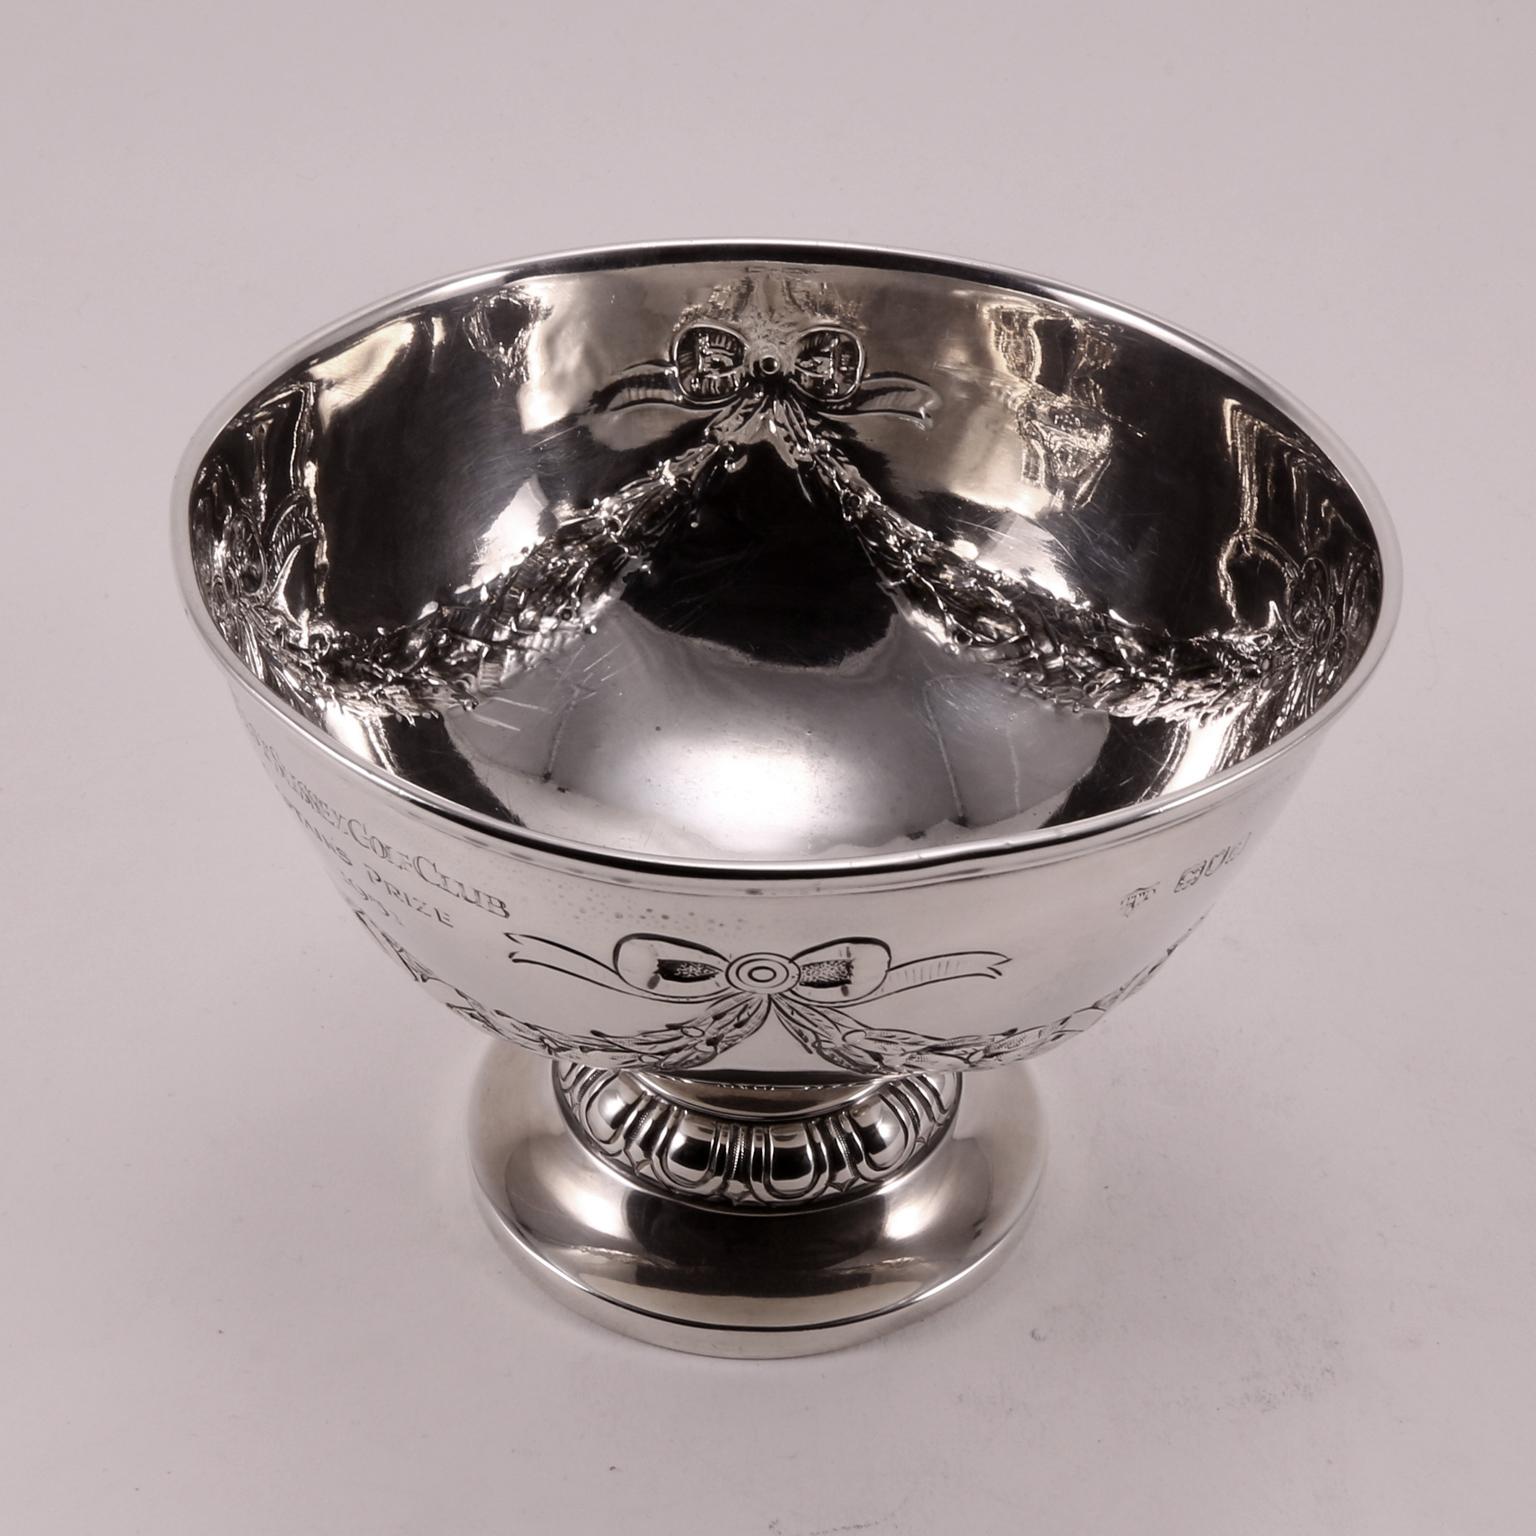 19th Century Mappin Webb Silver Bowl Decorated with Flackes and Flowers (Sterlingsilber) im Angebot